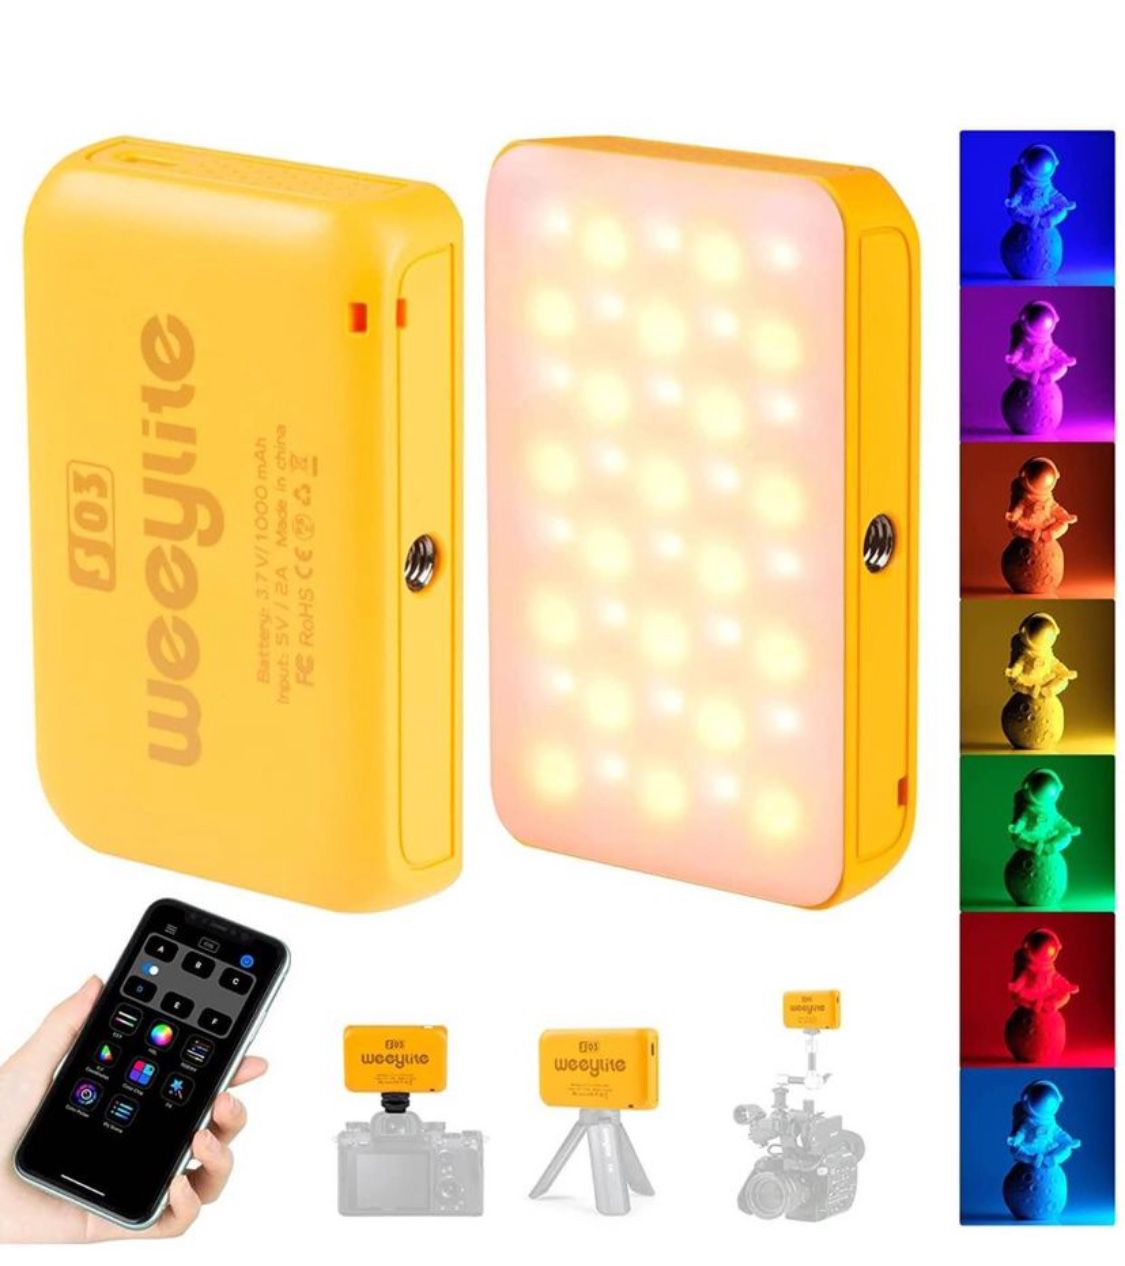 New! RGB LED Camera Light, App Control Small LED RGBW Video Light Multi Color Portable Photography Lighting with Built-in Battery Type-C Charging Mini